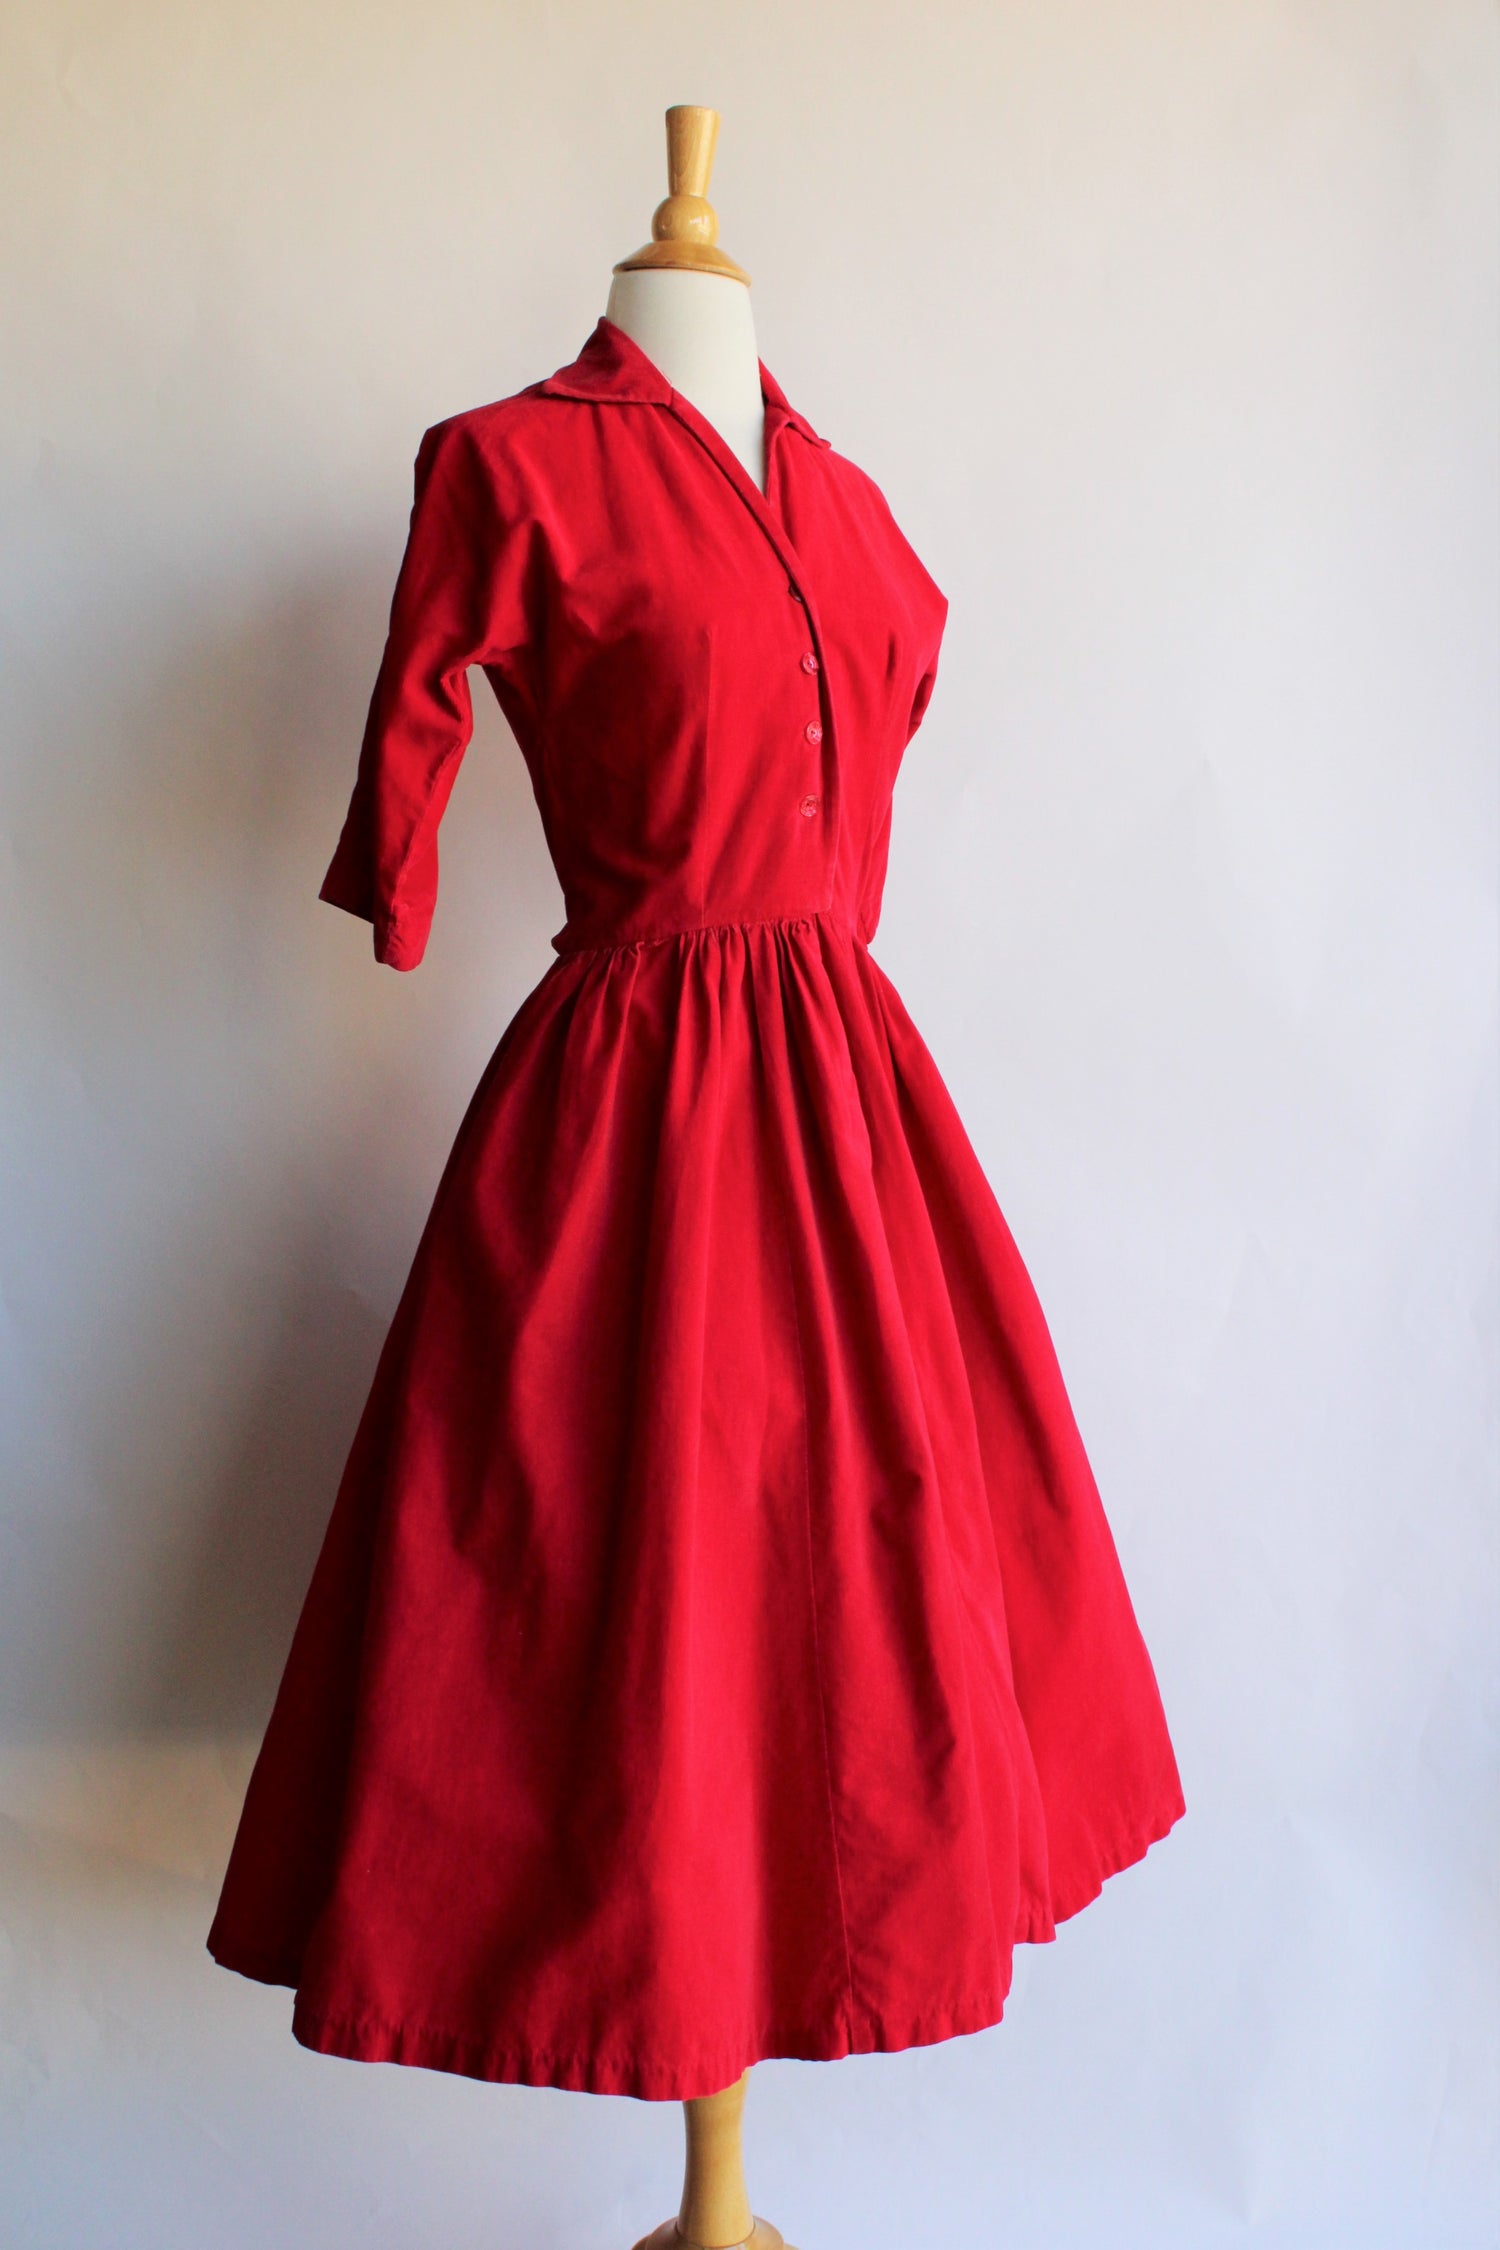 Vintage 1950s Red Corduroy Fit and Flare Dress by Mari Lou